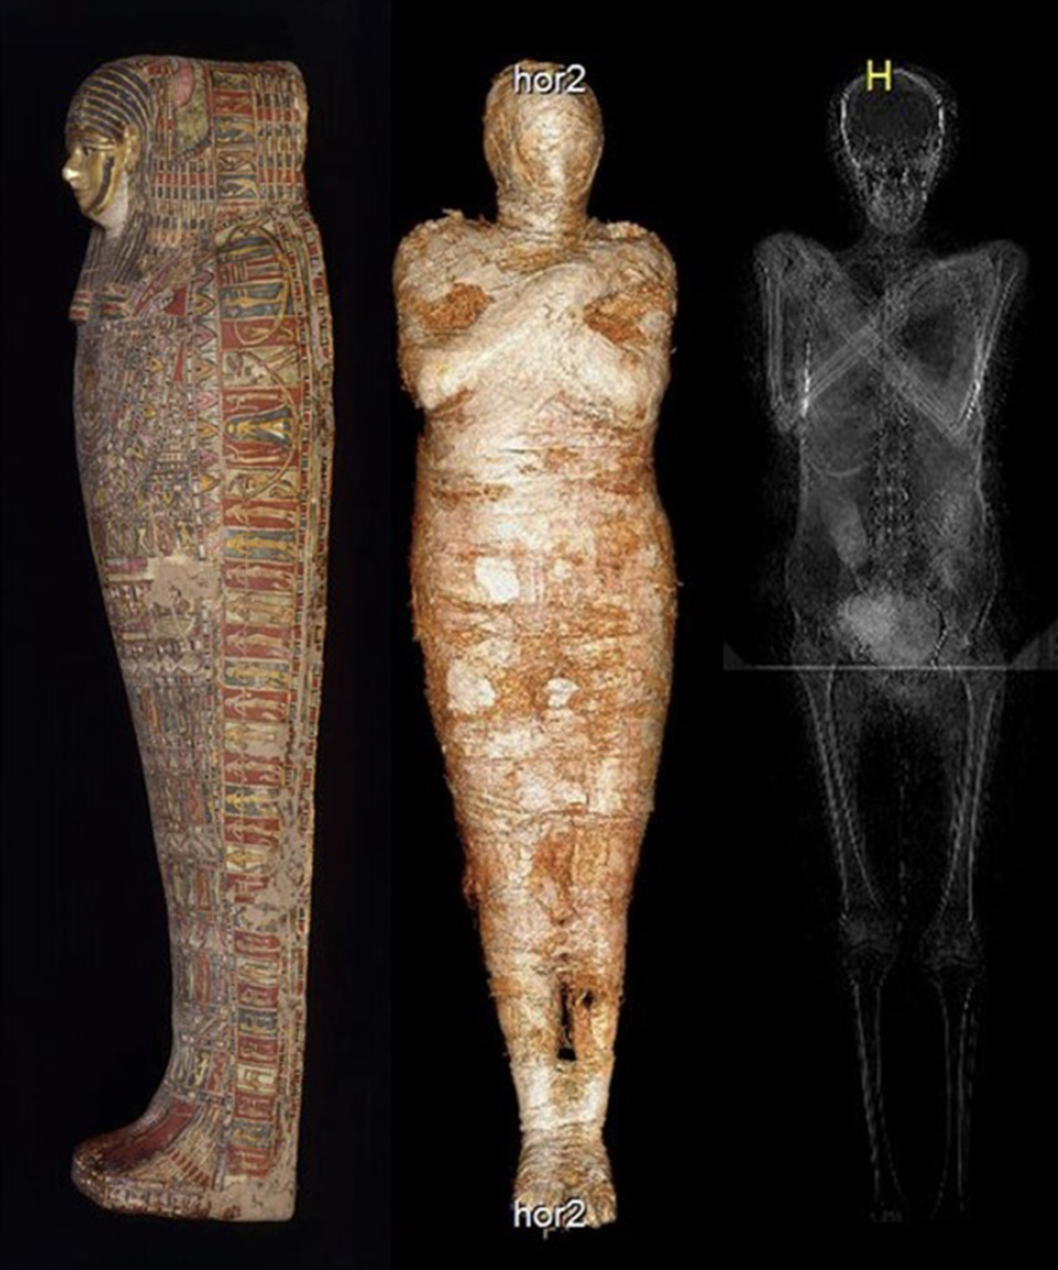 Three views, showing the coffin, the mummy, and an X-ray scan.  (Image: W. Ejsmond et al., 2021/Journal of Archaeological Science)